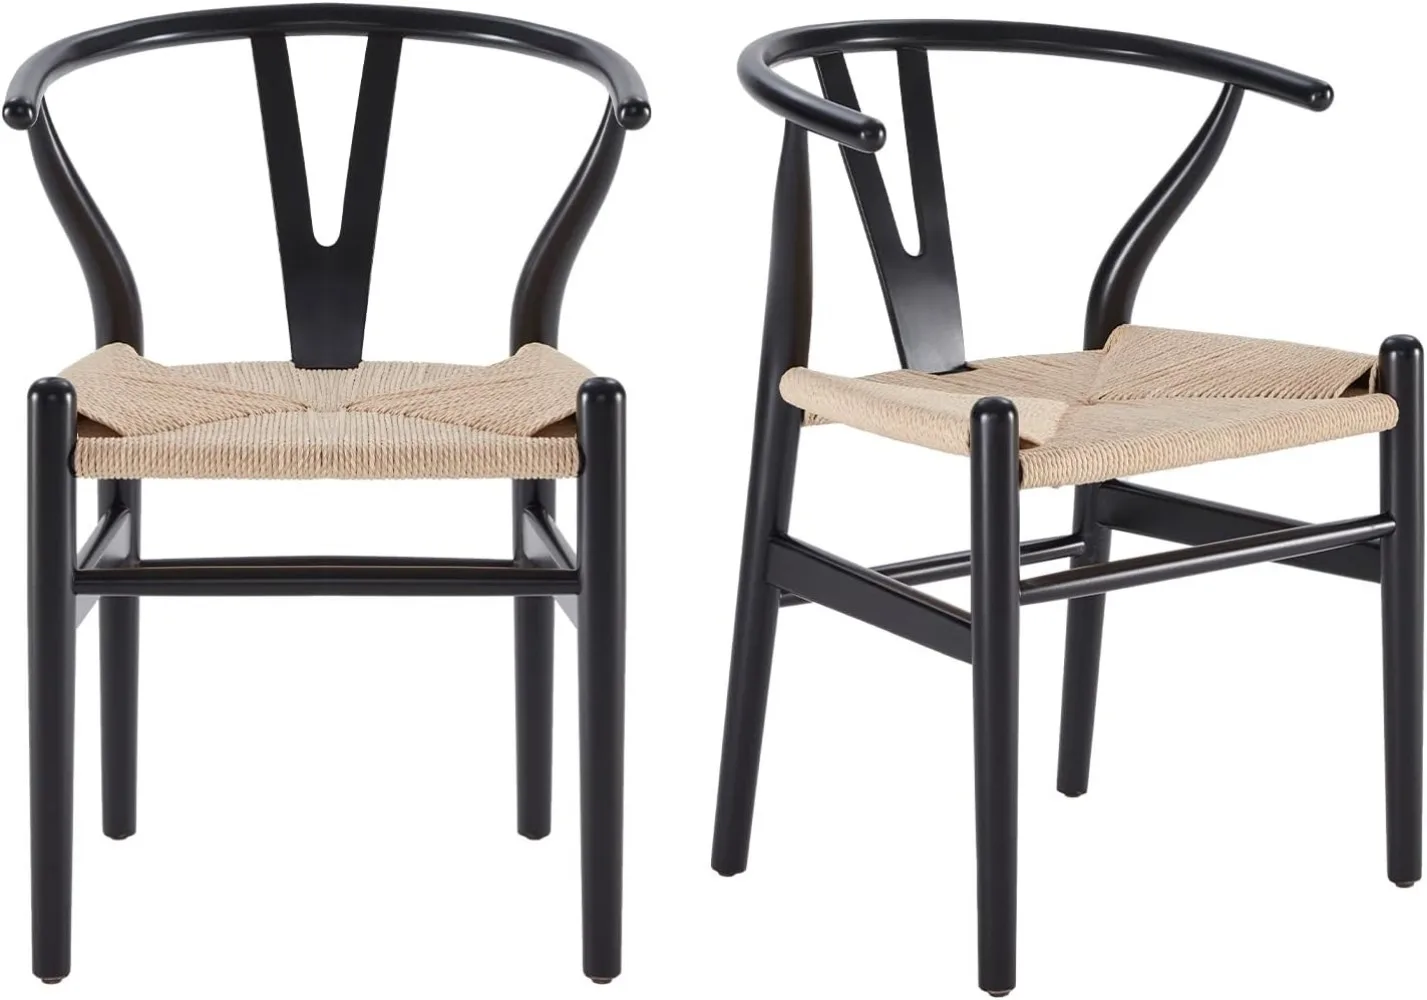 

Farini Wishbone Chairs for Dining Room Solid Wood Rattan Chair Armchairs Y Shaped Backrest Hemp Seat for Home Restaurant